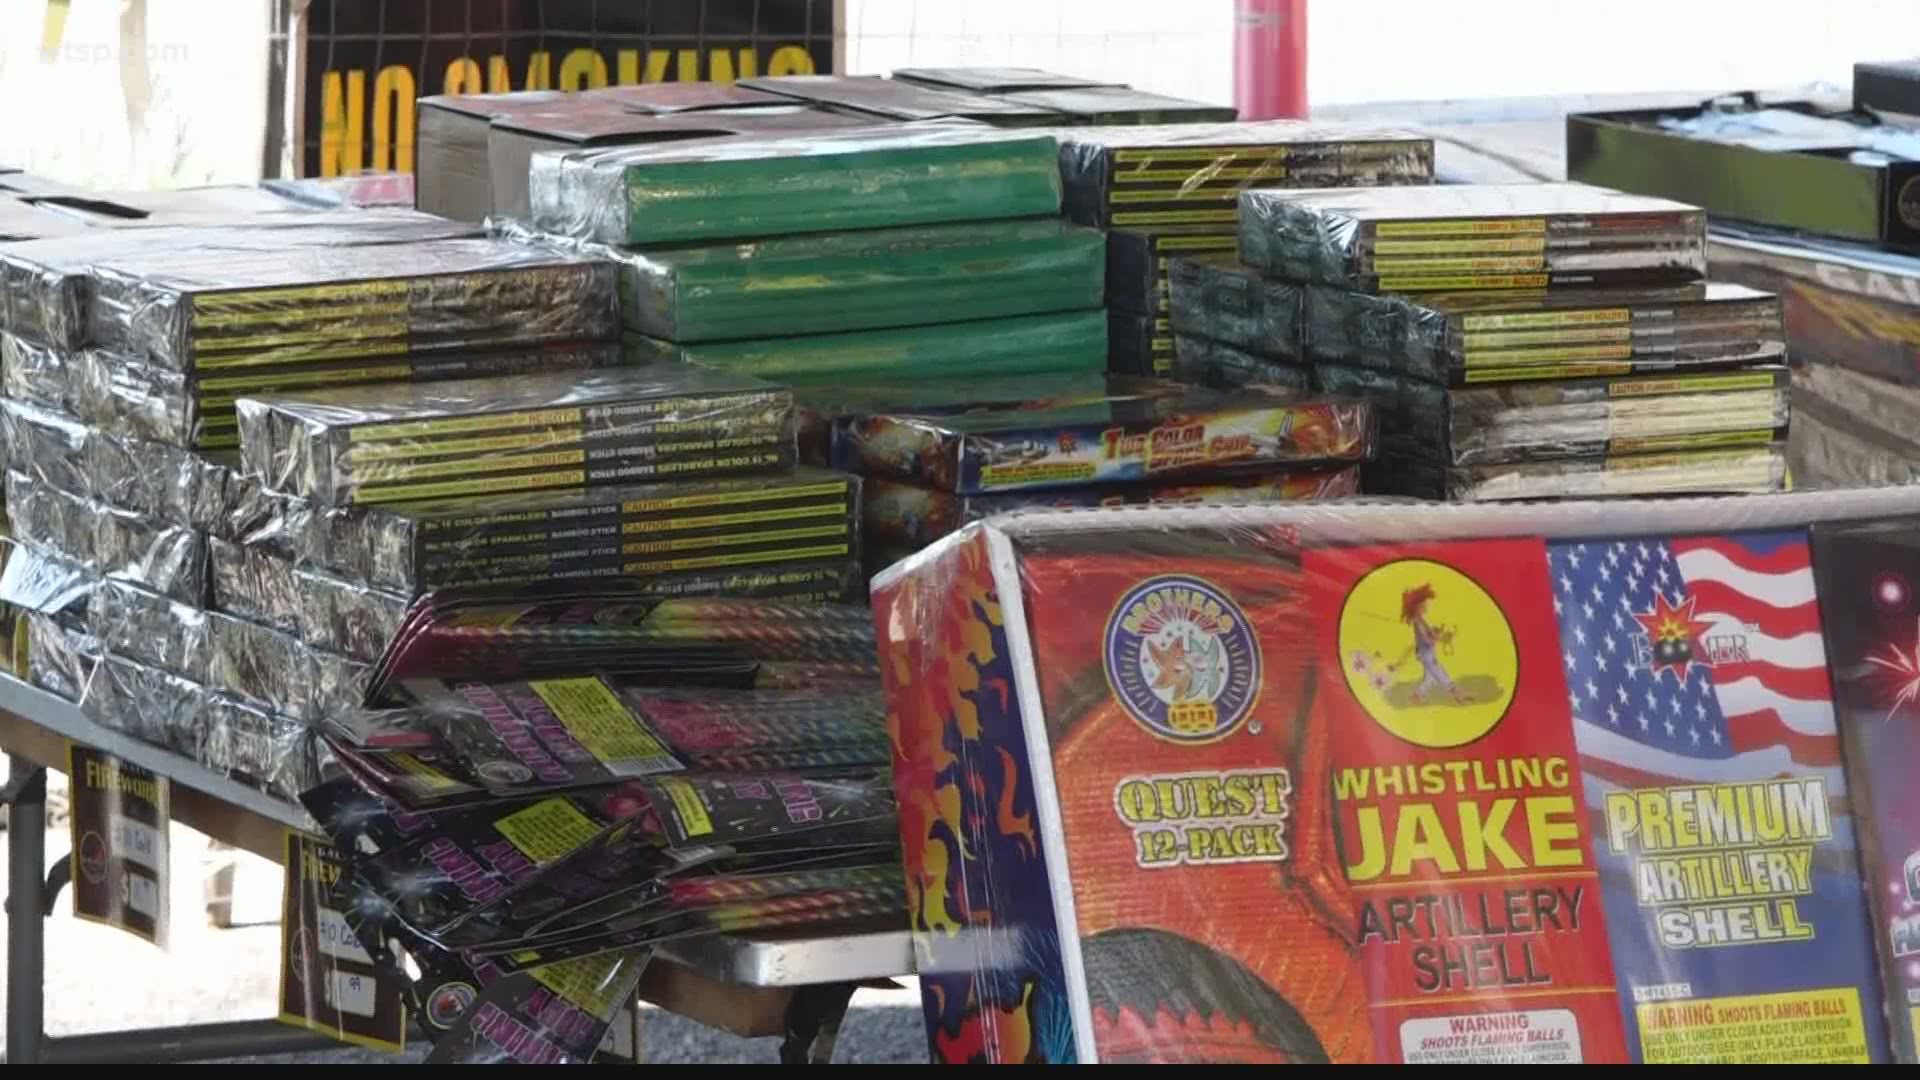 With so many local cities canceling their professional pyrotechnic shows due to COVID-19, firework sales are booming.